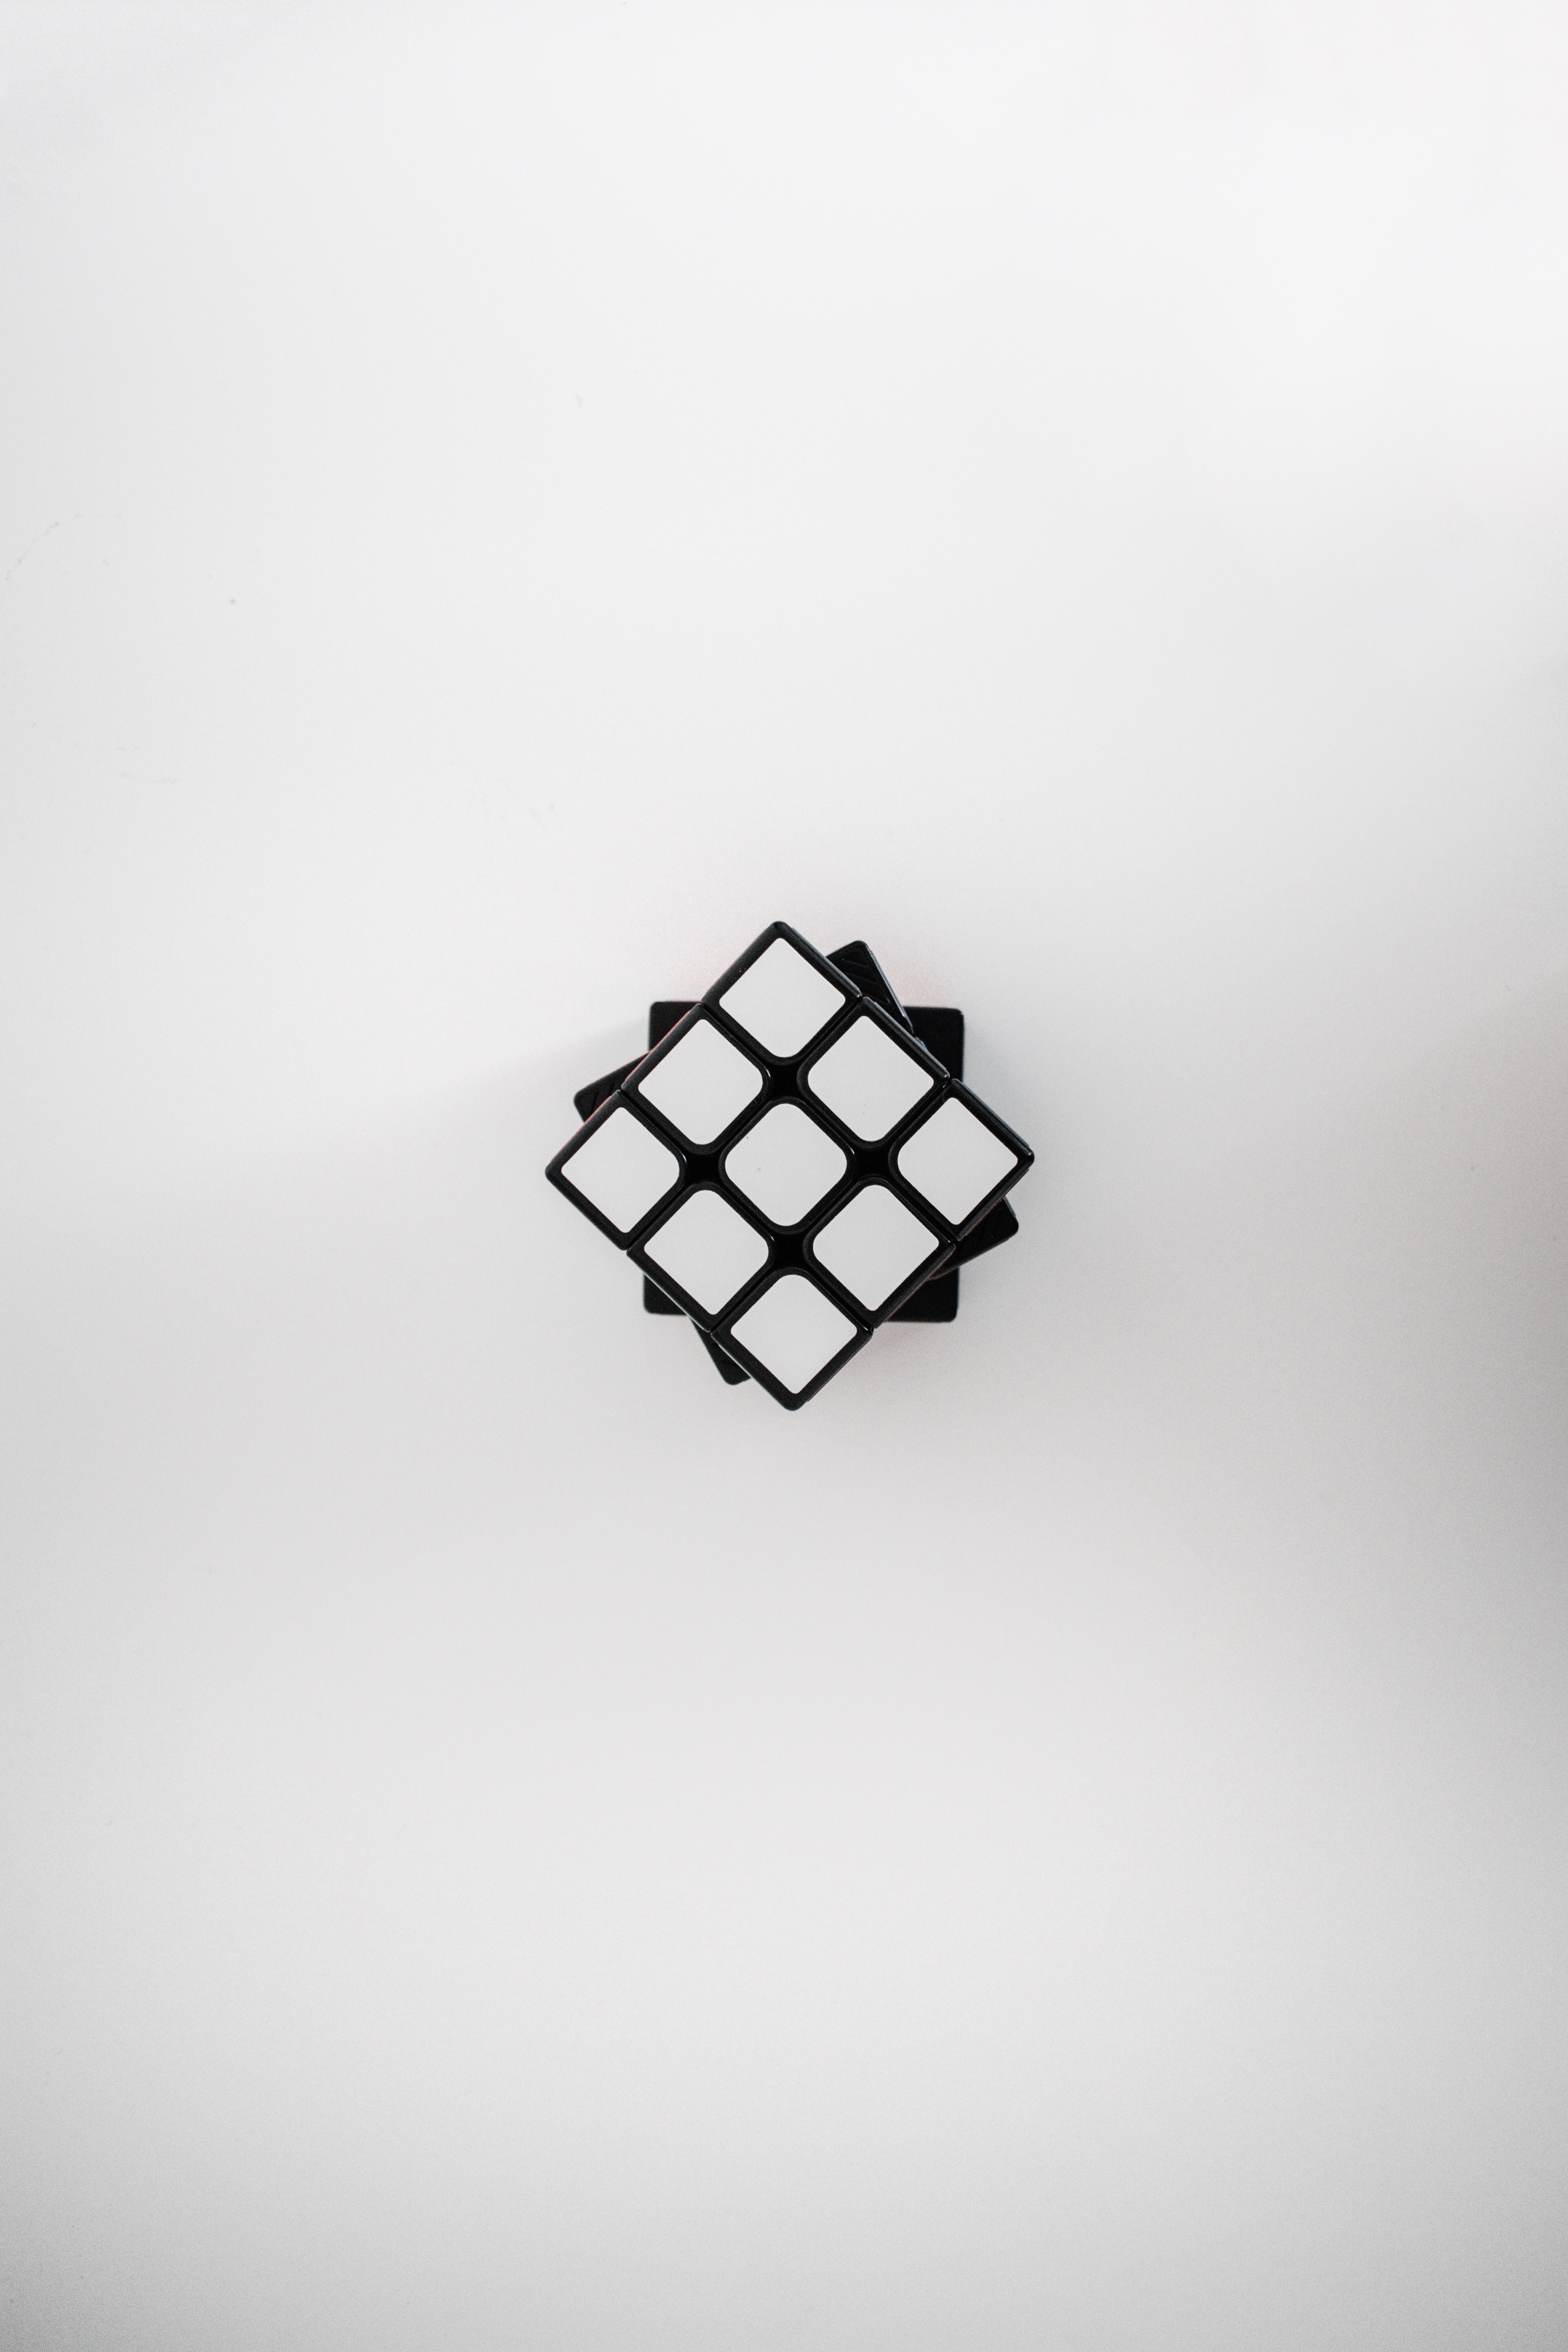 rubik's cube, cube, miscellanea, white, view from above, miscellaneous mobile wallpaper